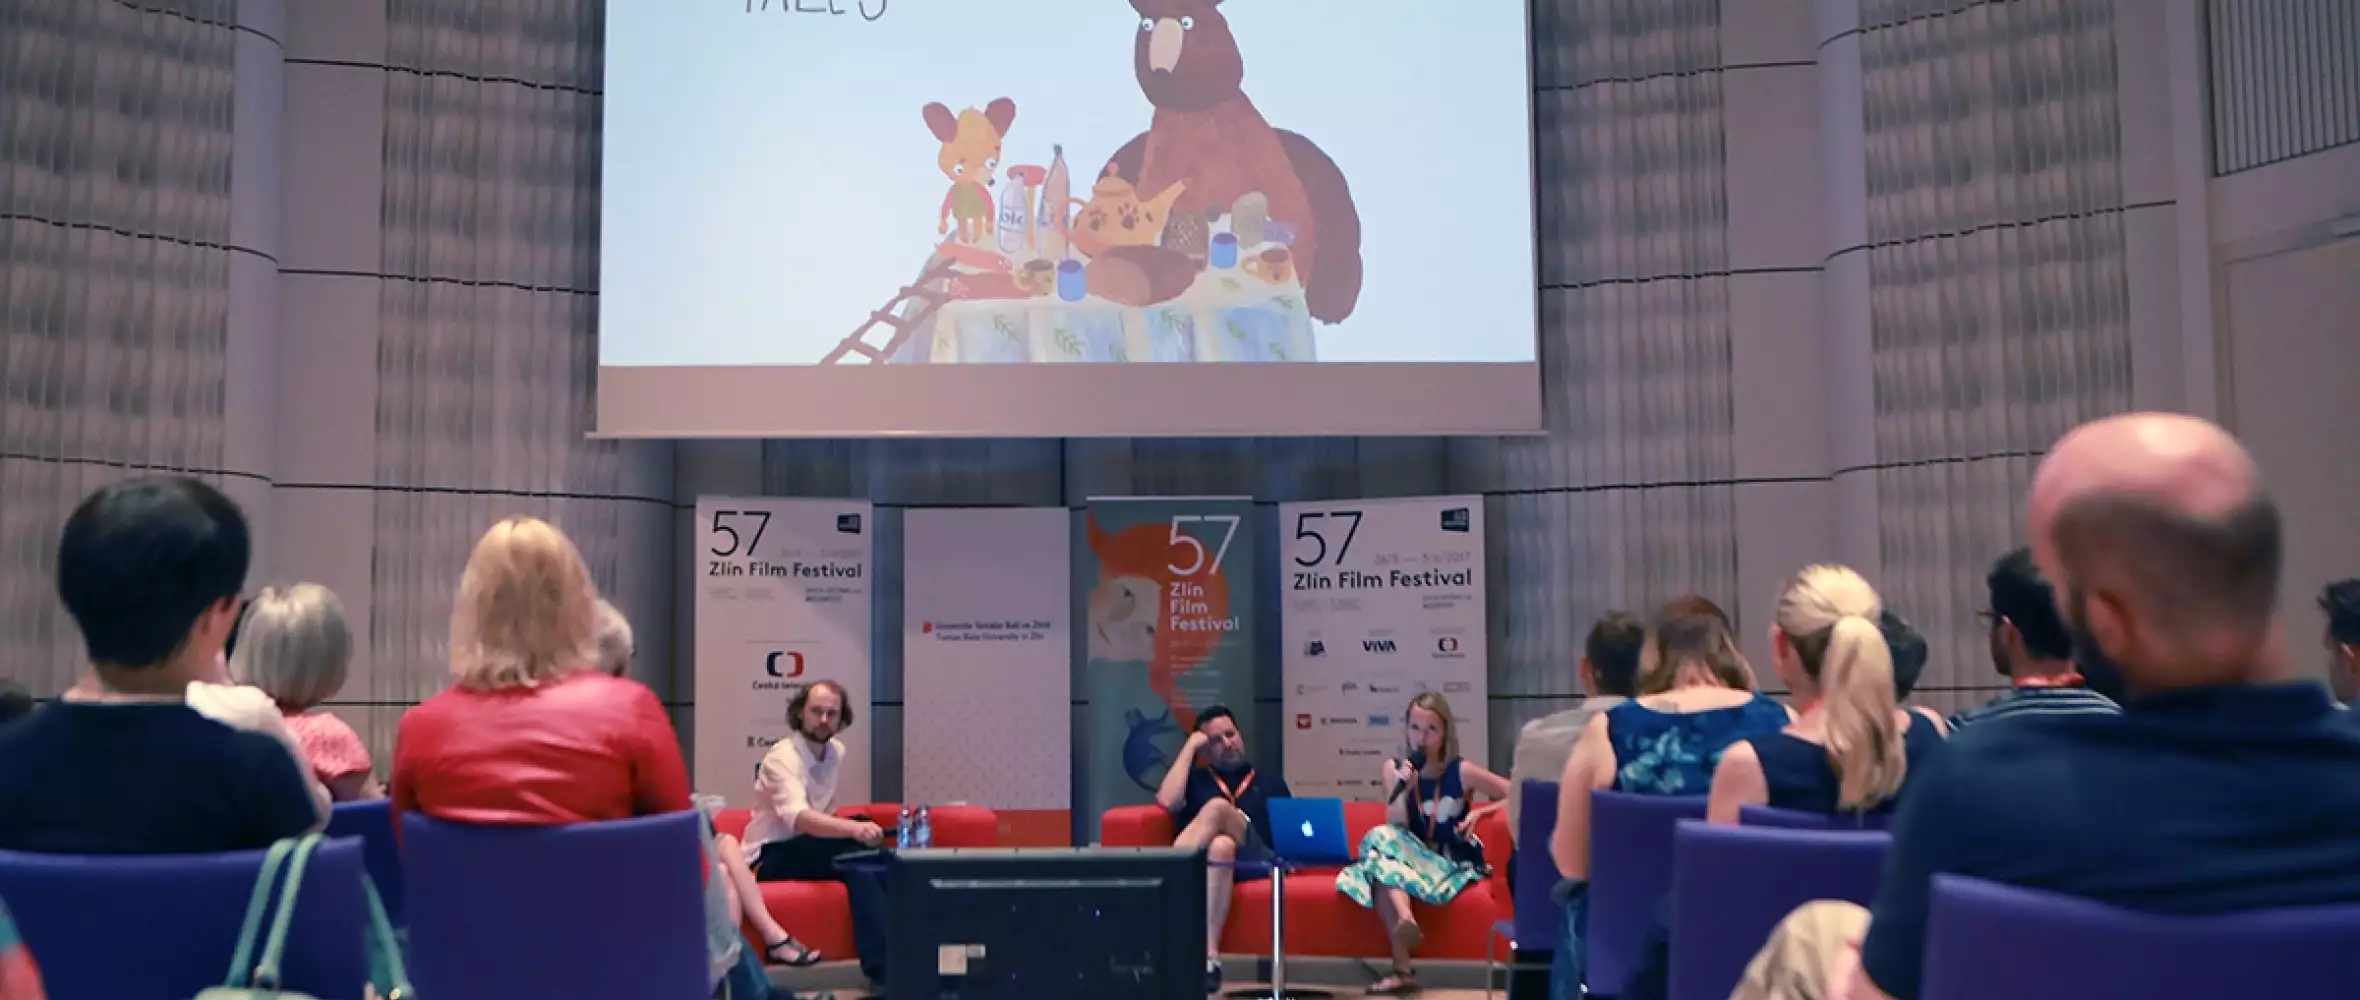 Upcoming Projects for Children Presented at Zlín Film Festival